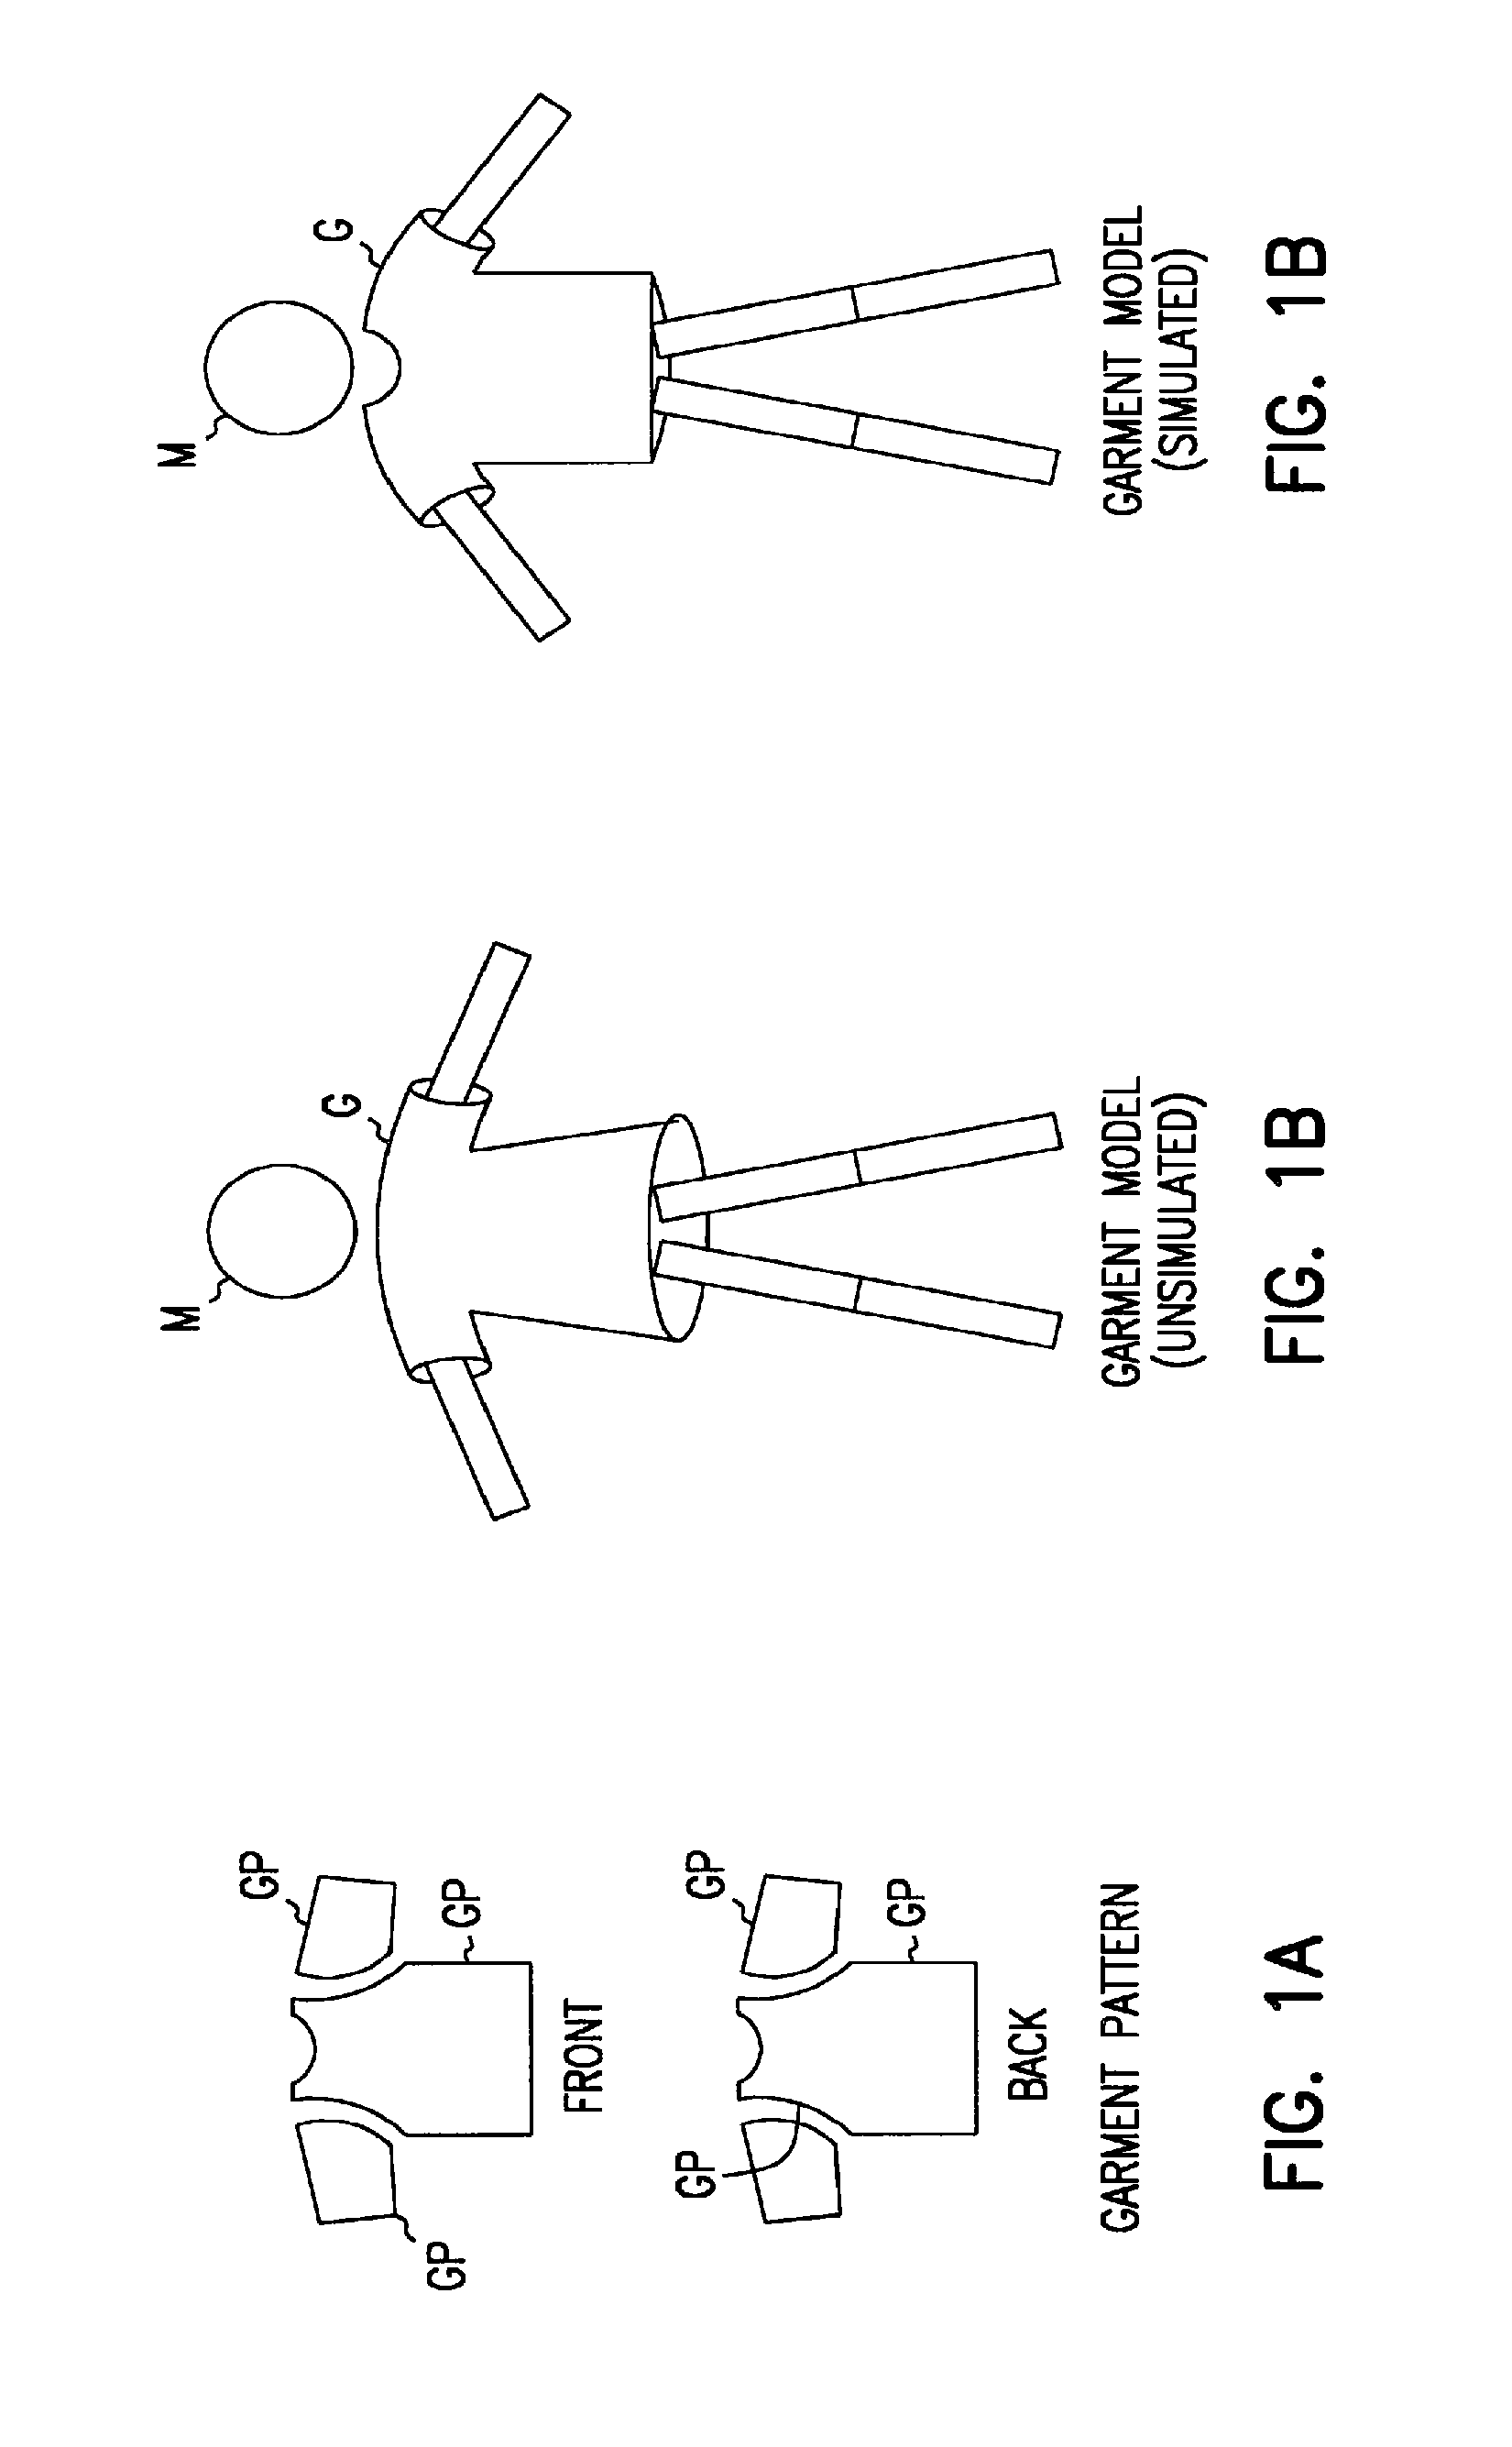 System and method for displaying selected garments on a computer-simulated mannequin